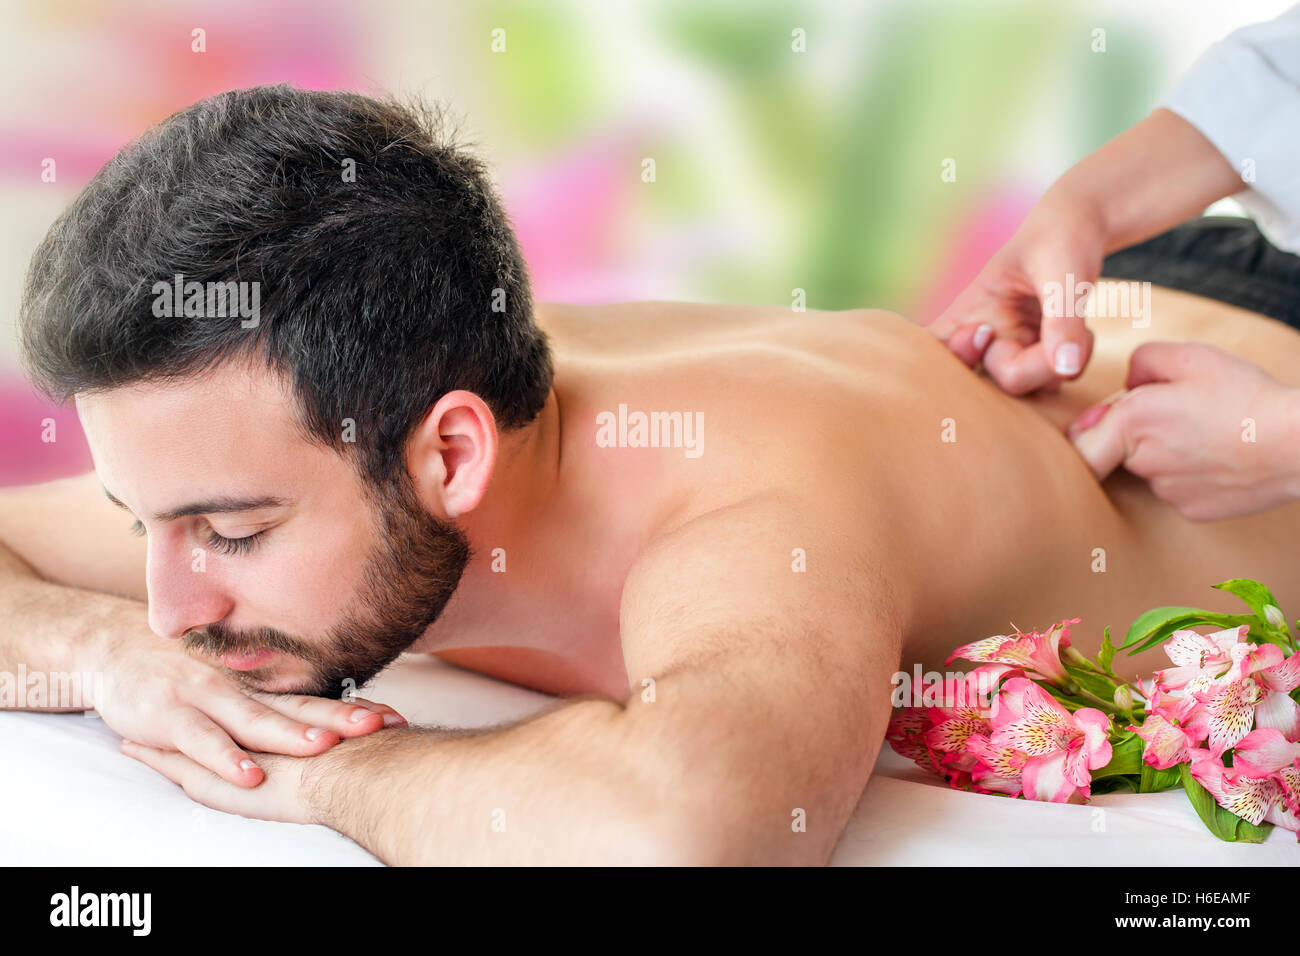 Close up of young man enjoying back massage. Young man laying face down and therapist hands massaging lower back. Stock Photo